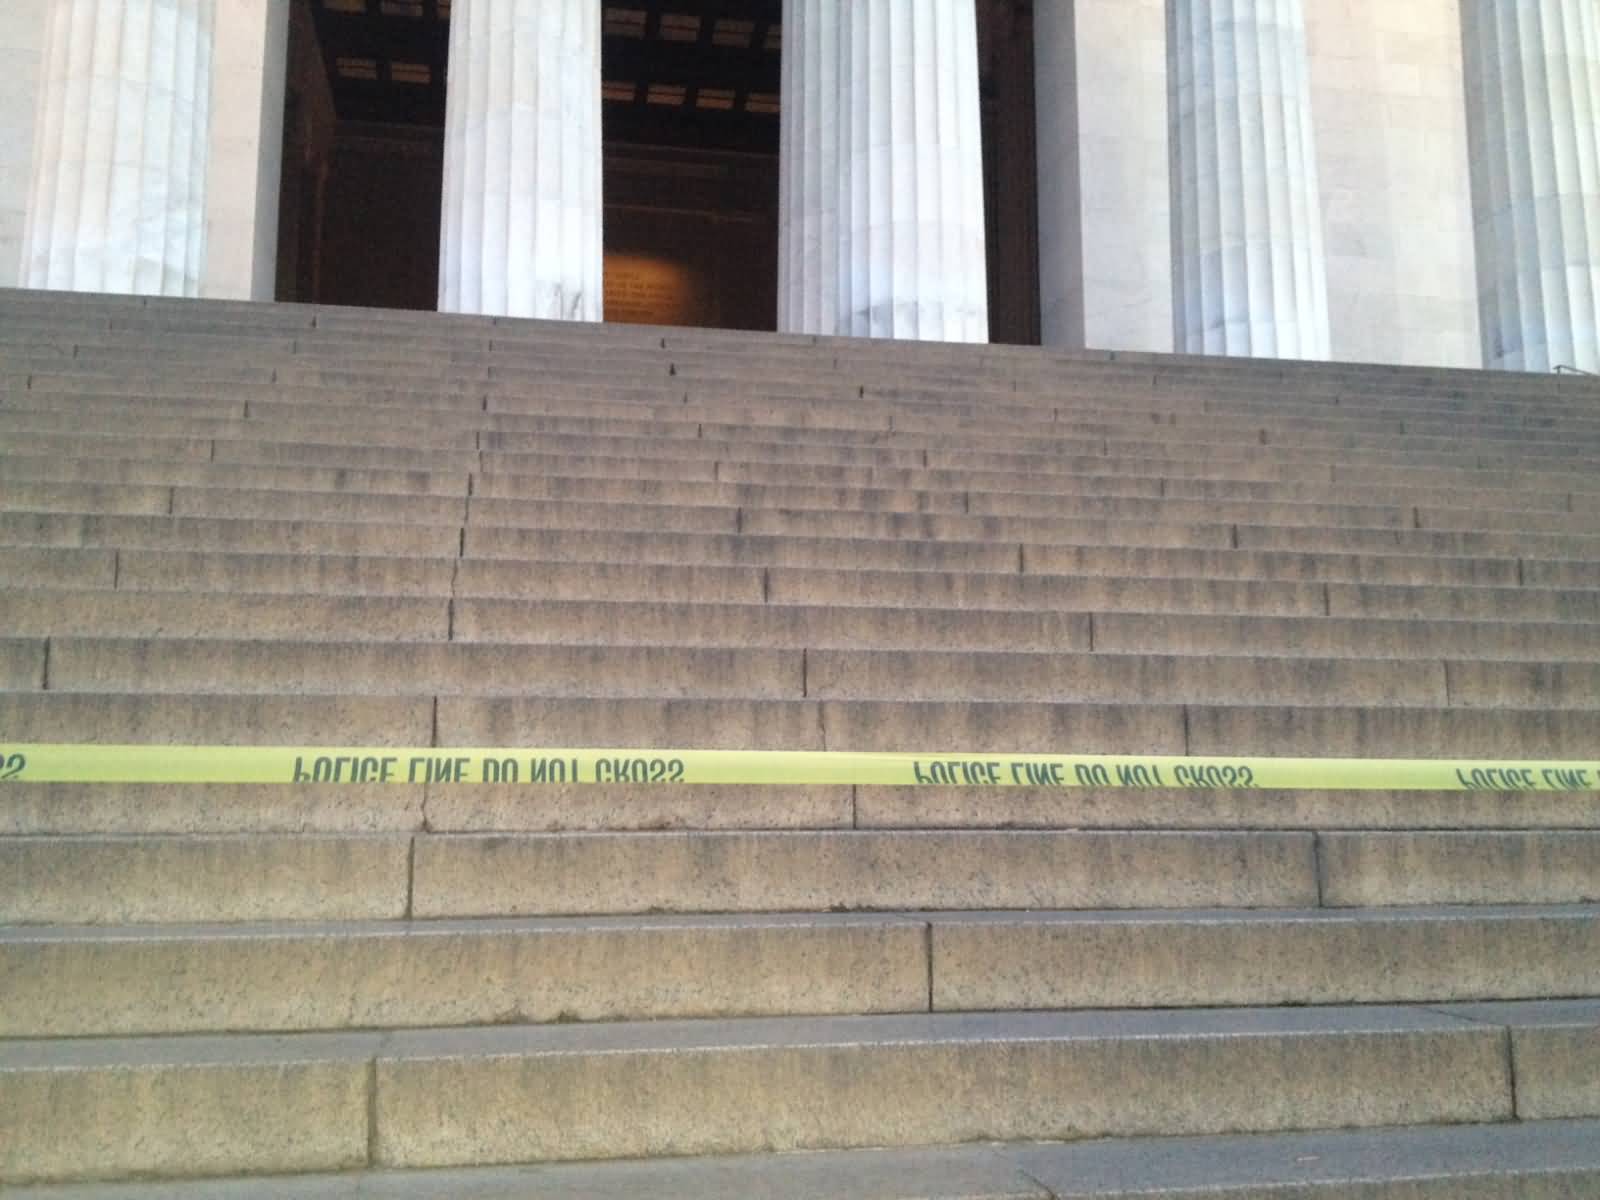 Police Tape Blocks Steps At The Base Of The Lincoln Memorial